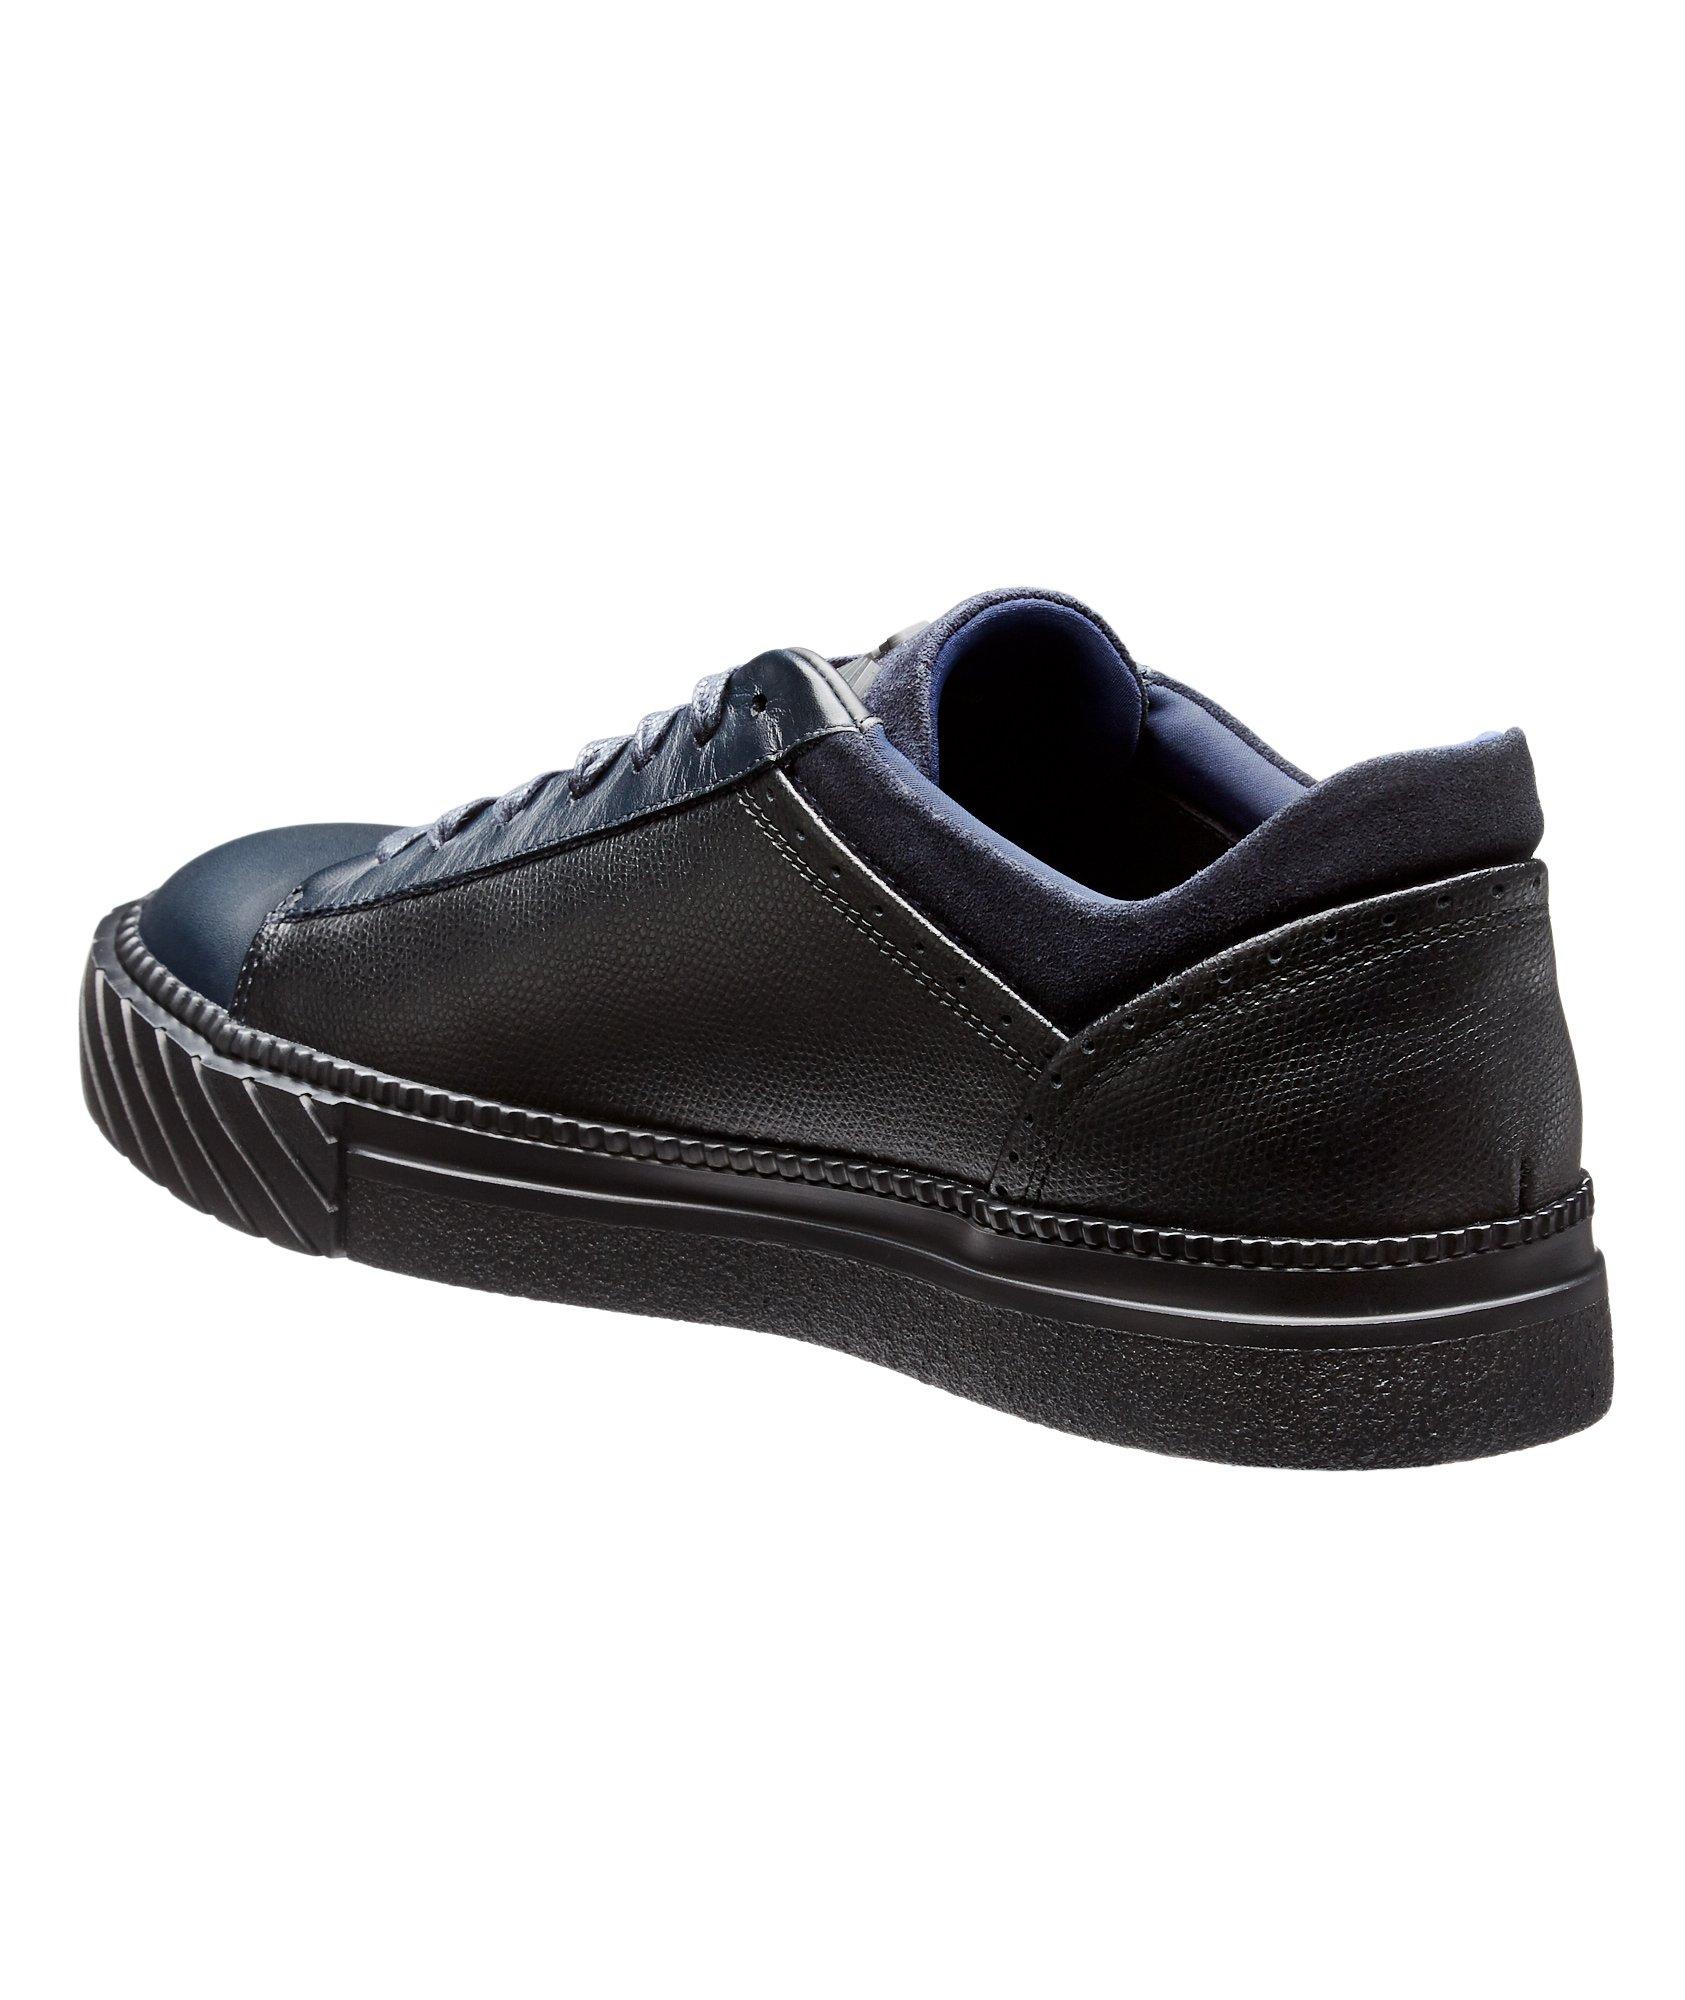 Leather Low-Top Sneakers image 1